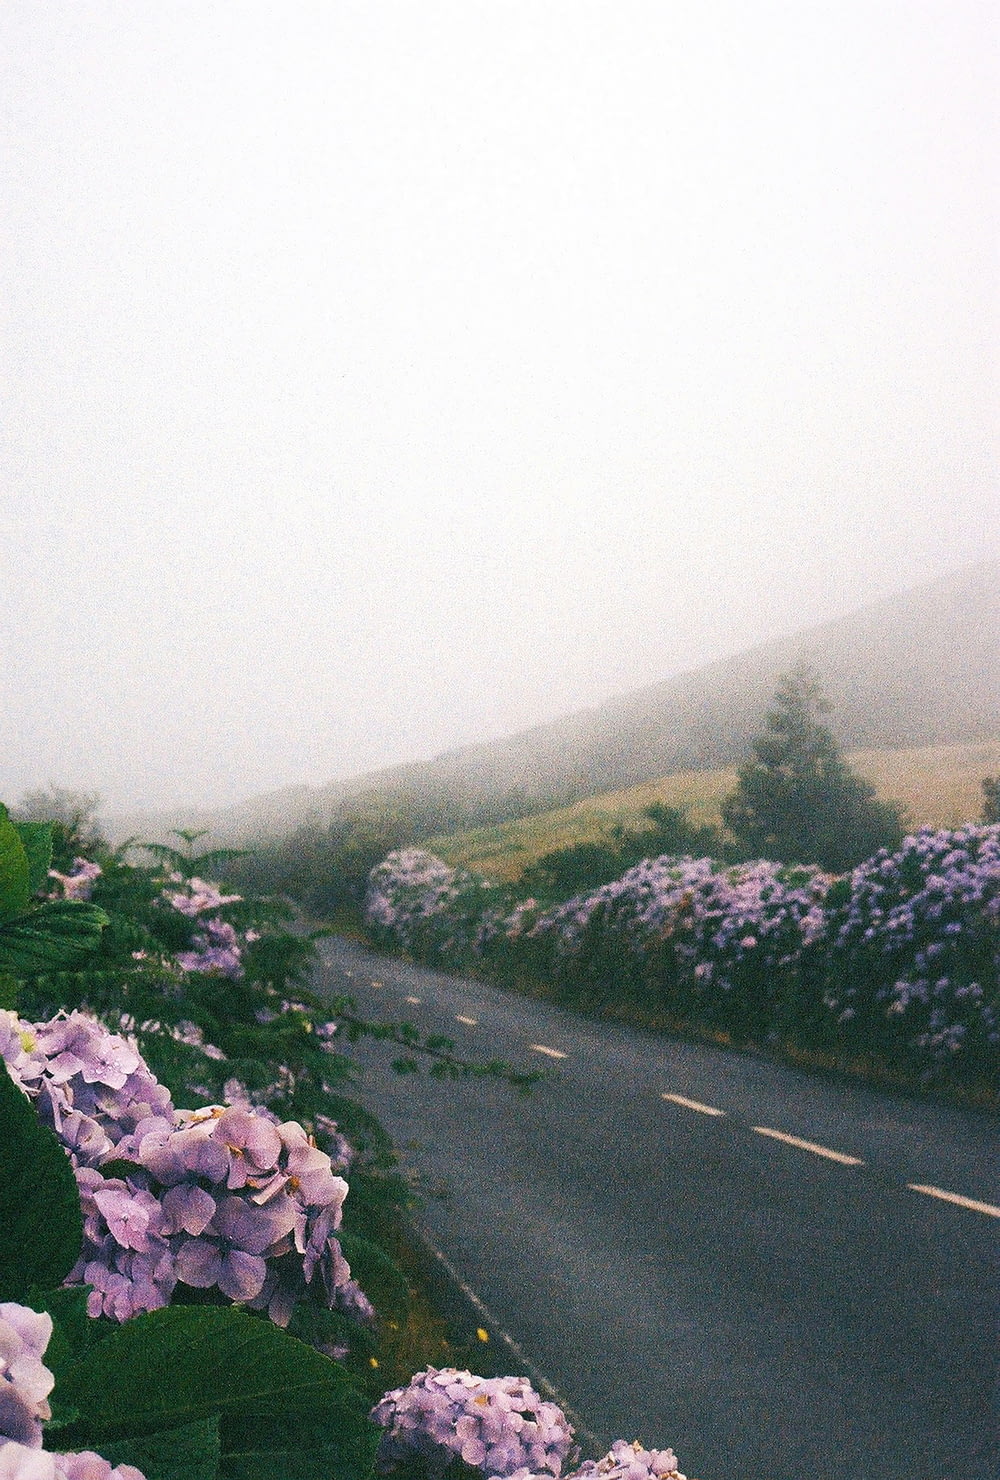 purple flowers line the side of a road on a foggy day